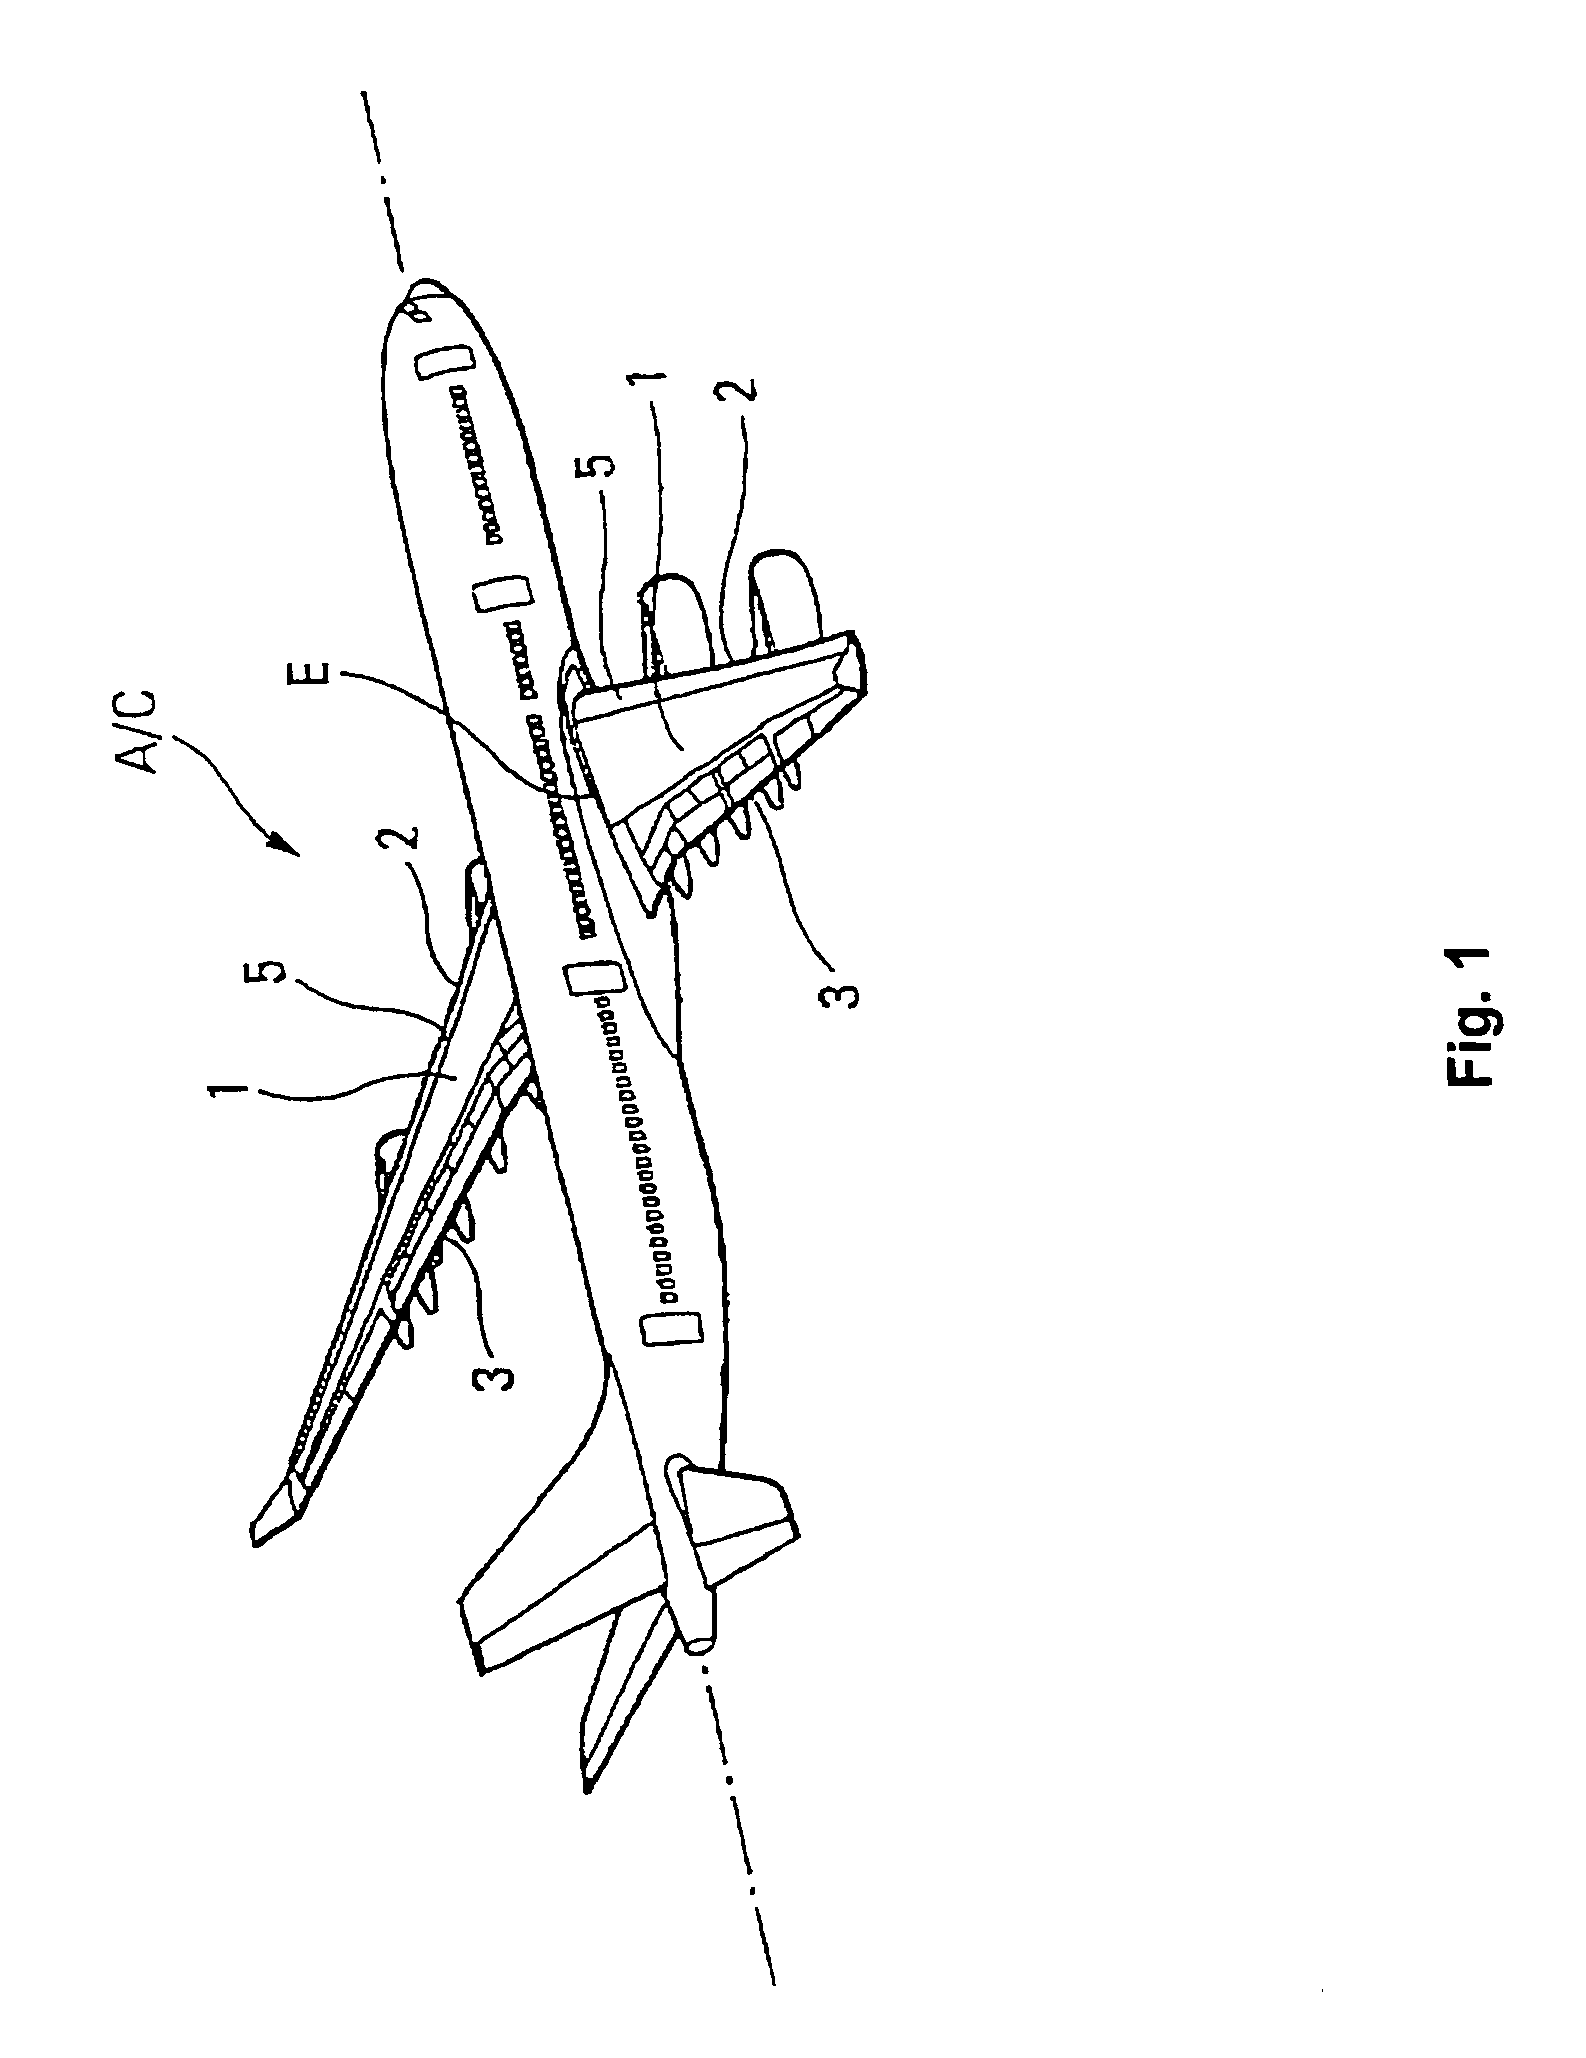 Procedure and device for improving the maneuverability of an aircraft during the approach to landing and flare-out phases